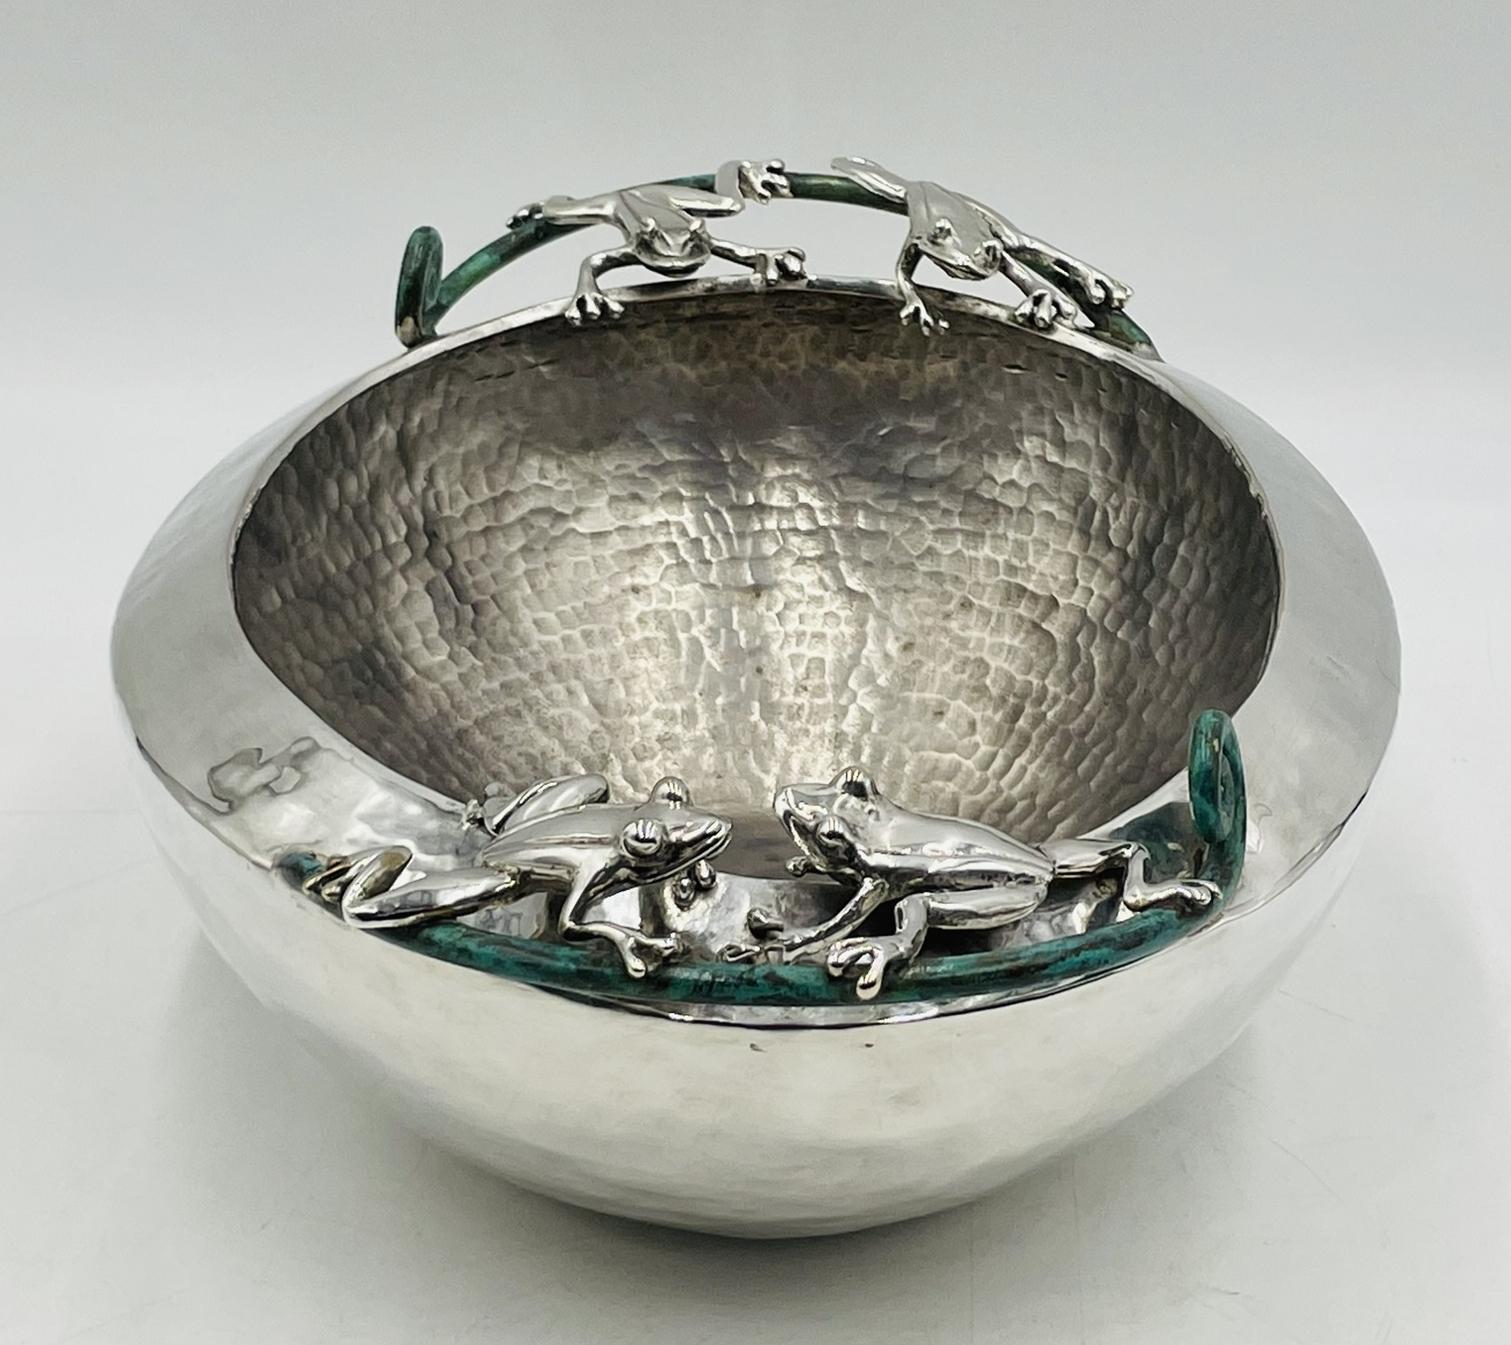 Hand-Crafted Large Silver-Plated Bowl With Frogs Handles by Emilia Castillo, Mexico 21st Cent For Sale